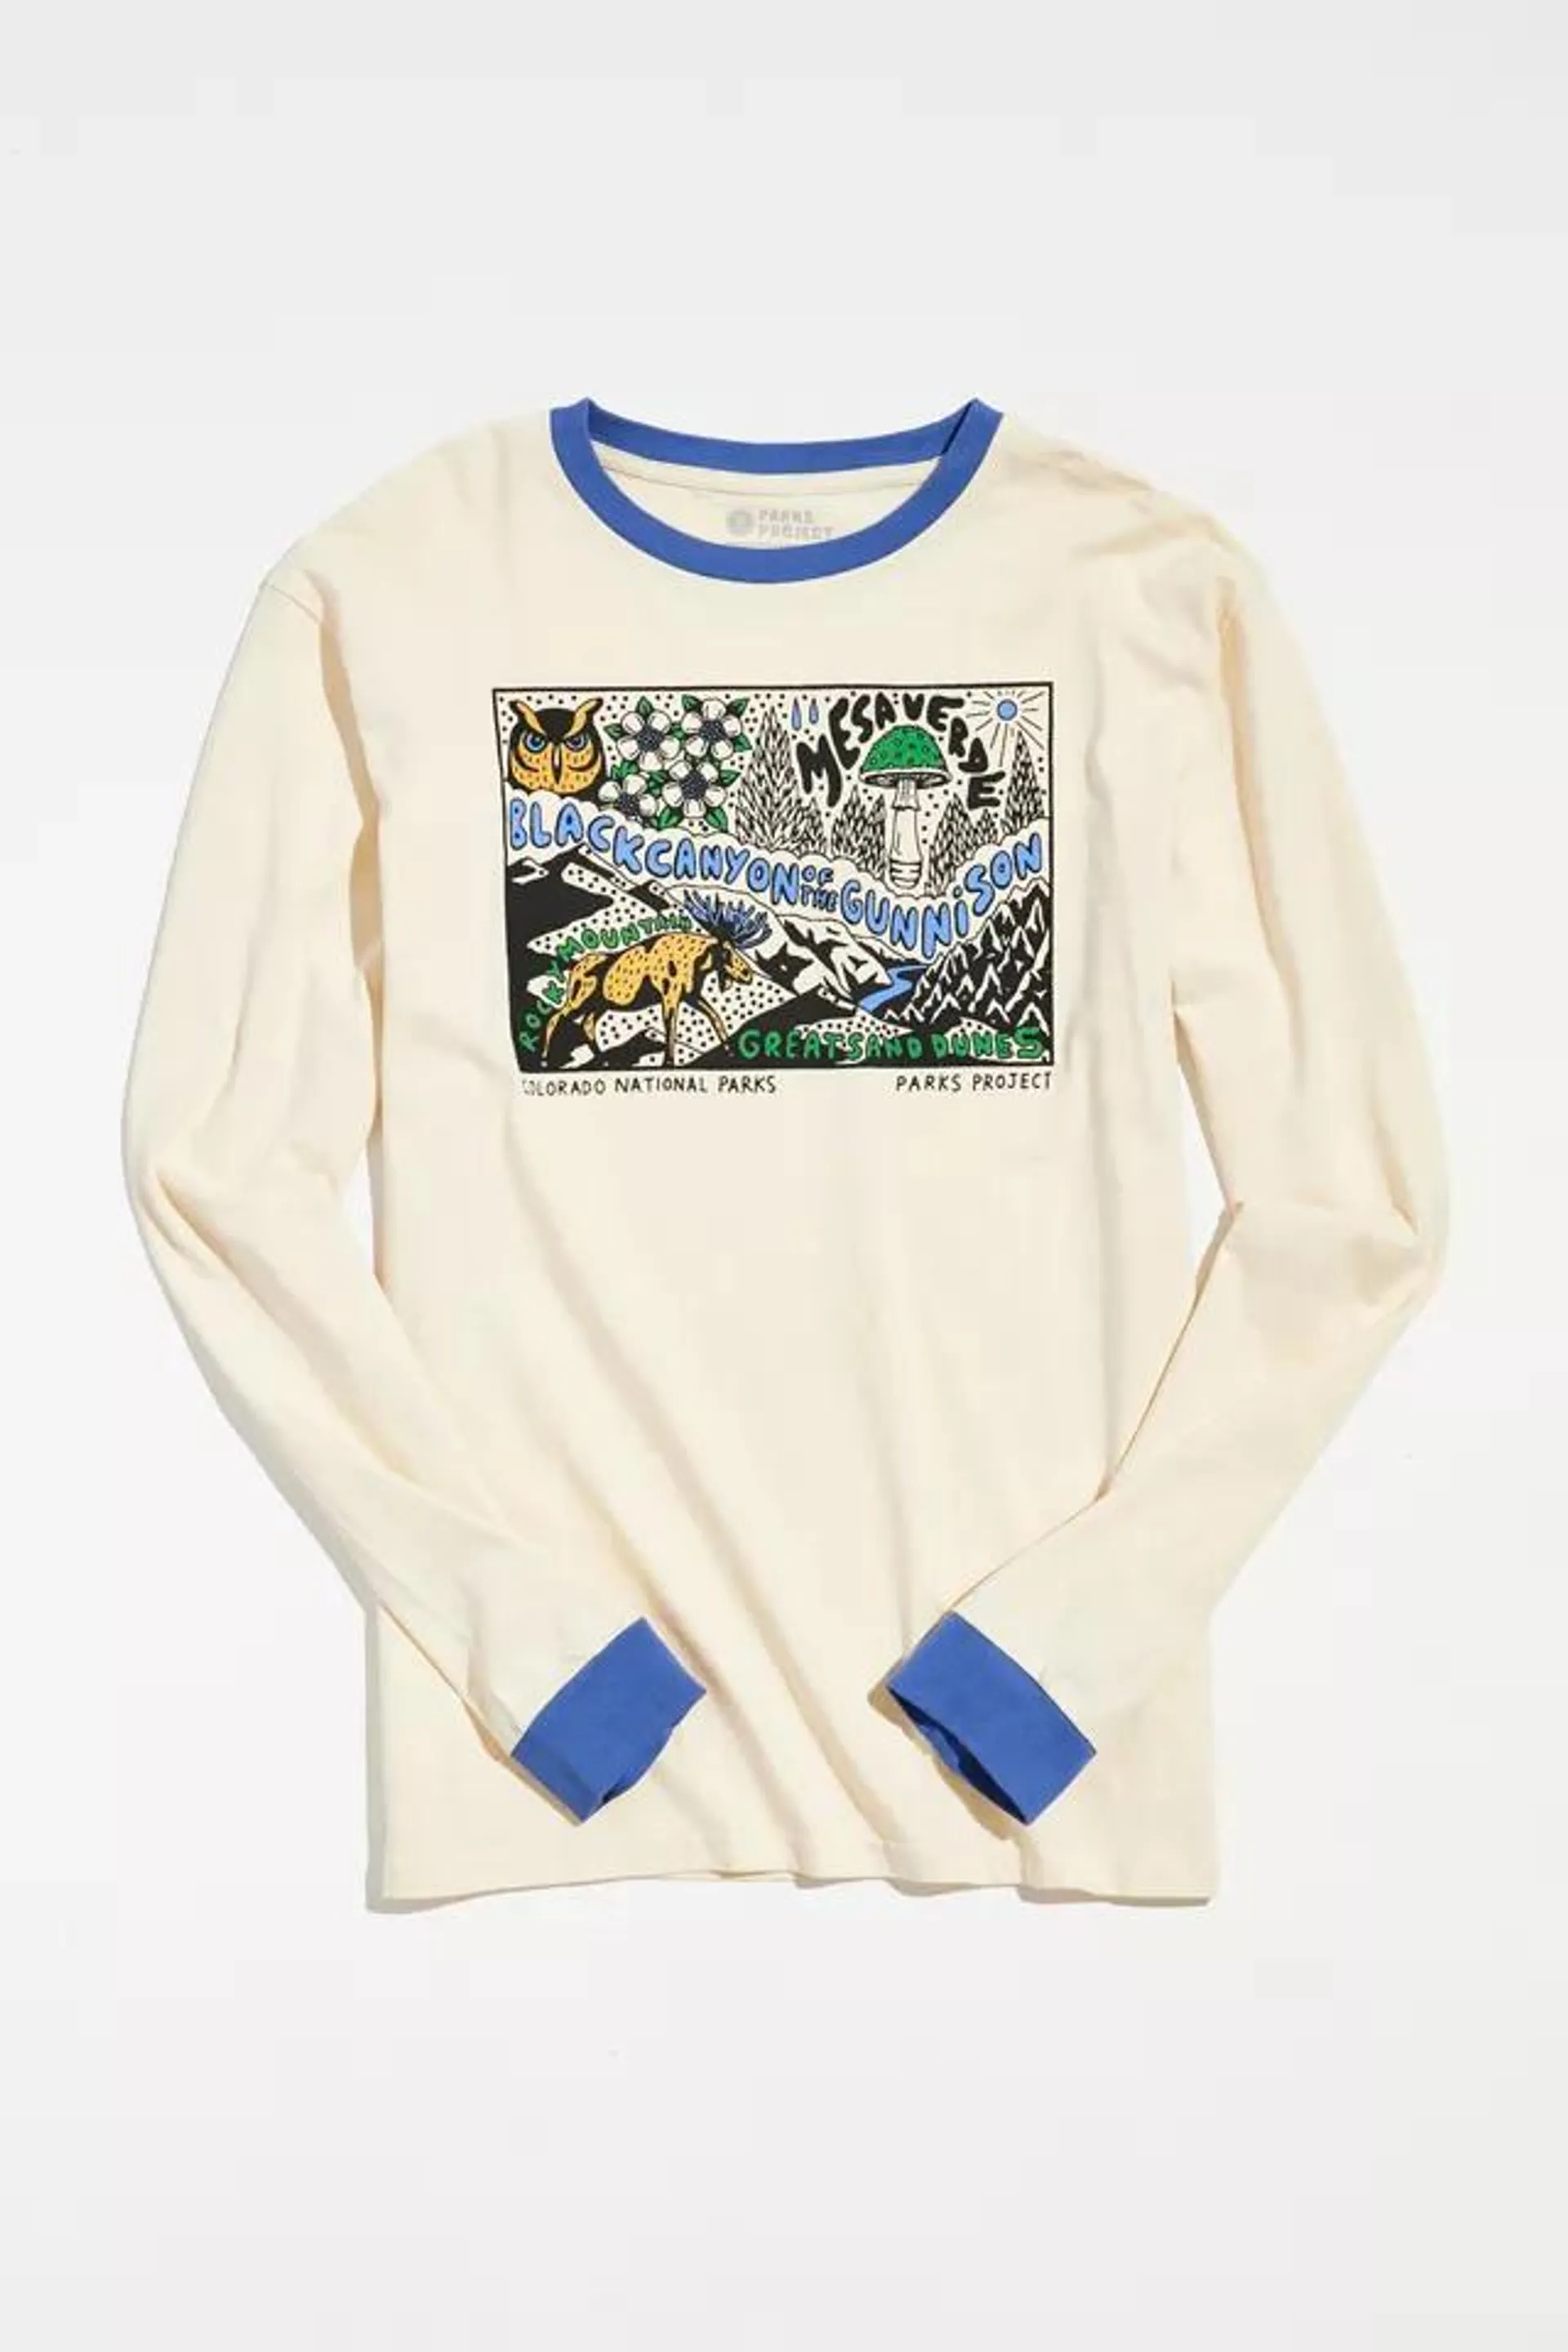 Parks Project Colorado Long Sleeve Tee